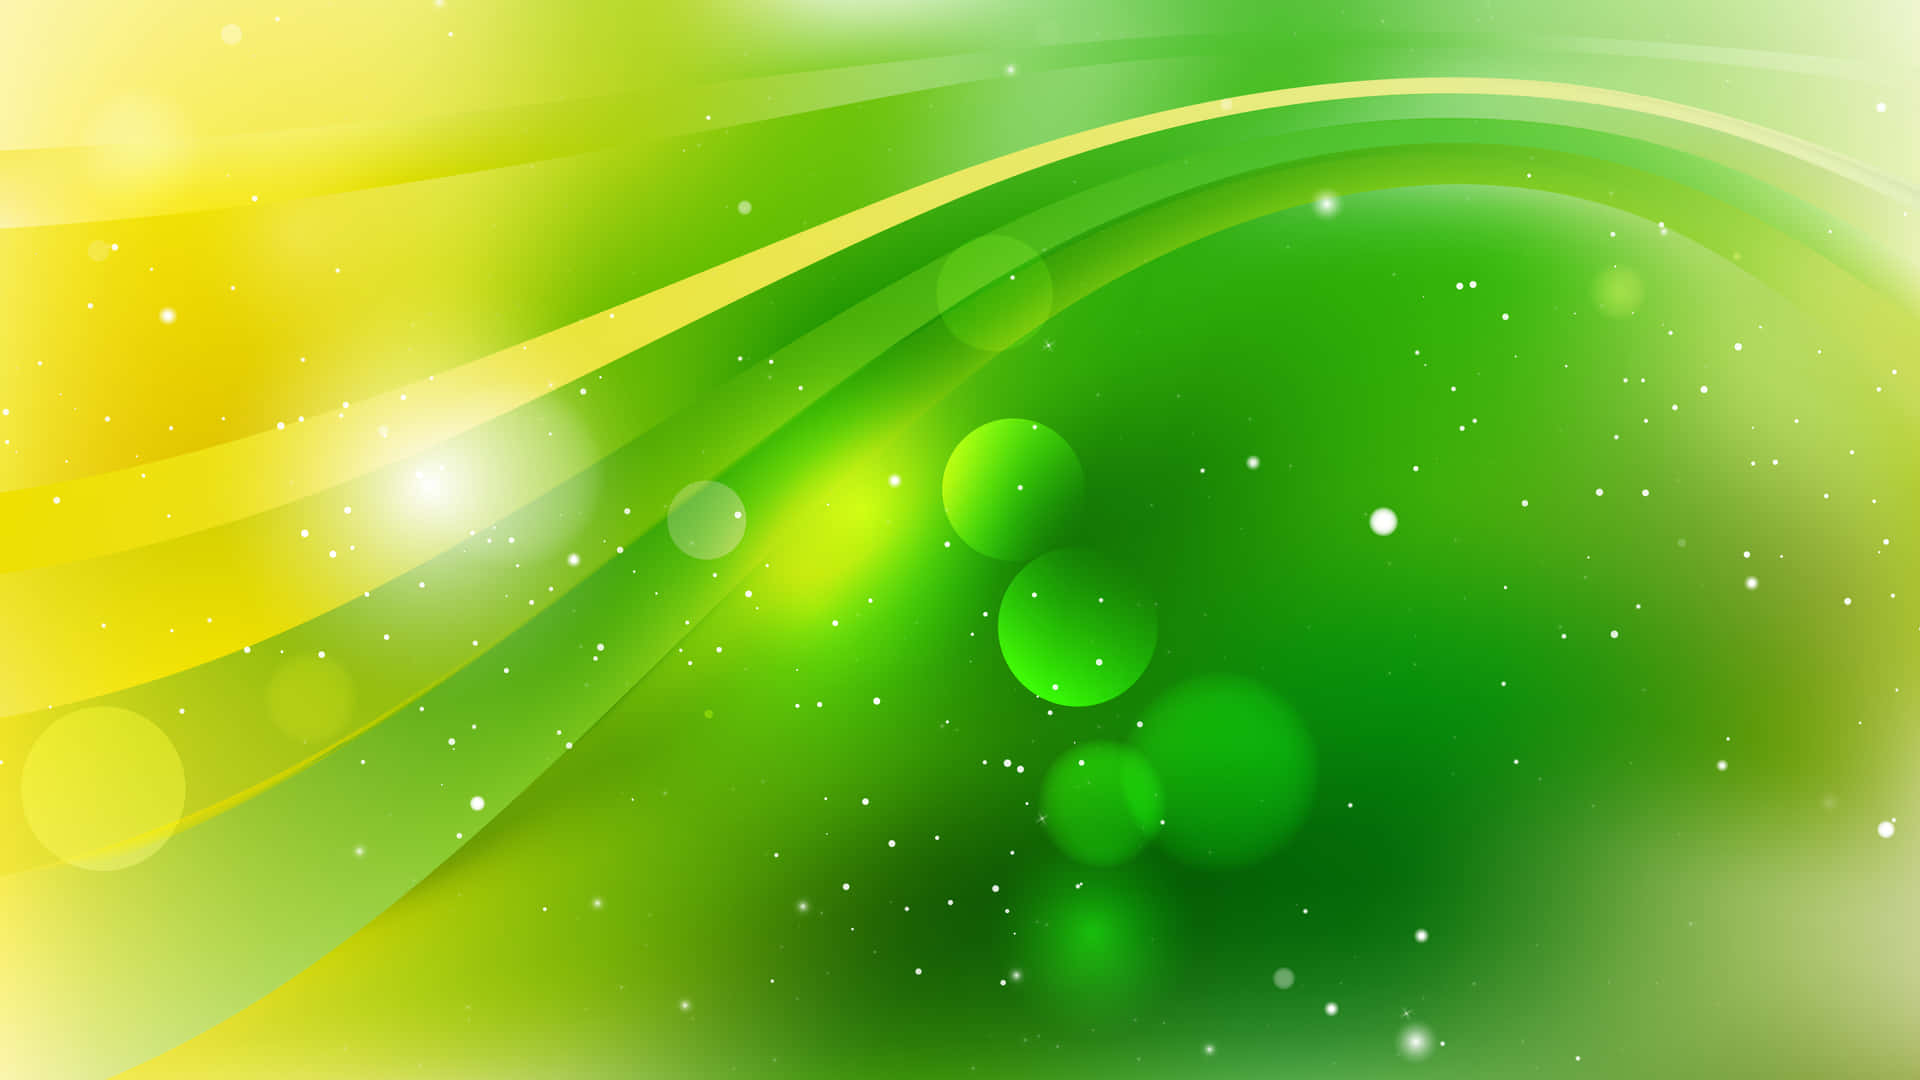 Abstract green background with spiraling shapes and textures.